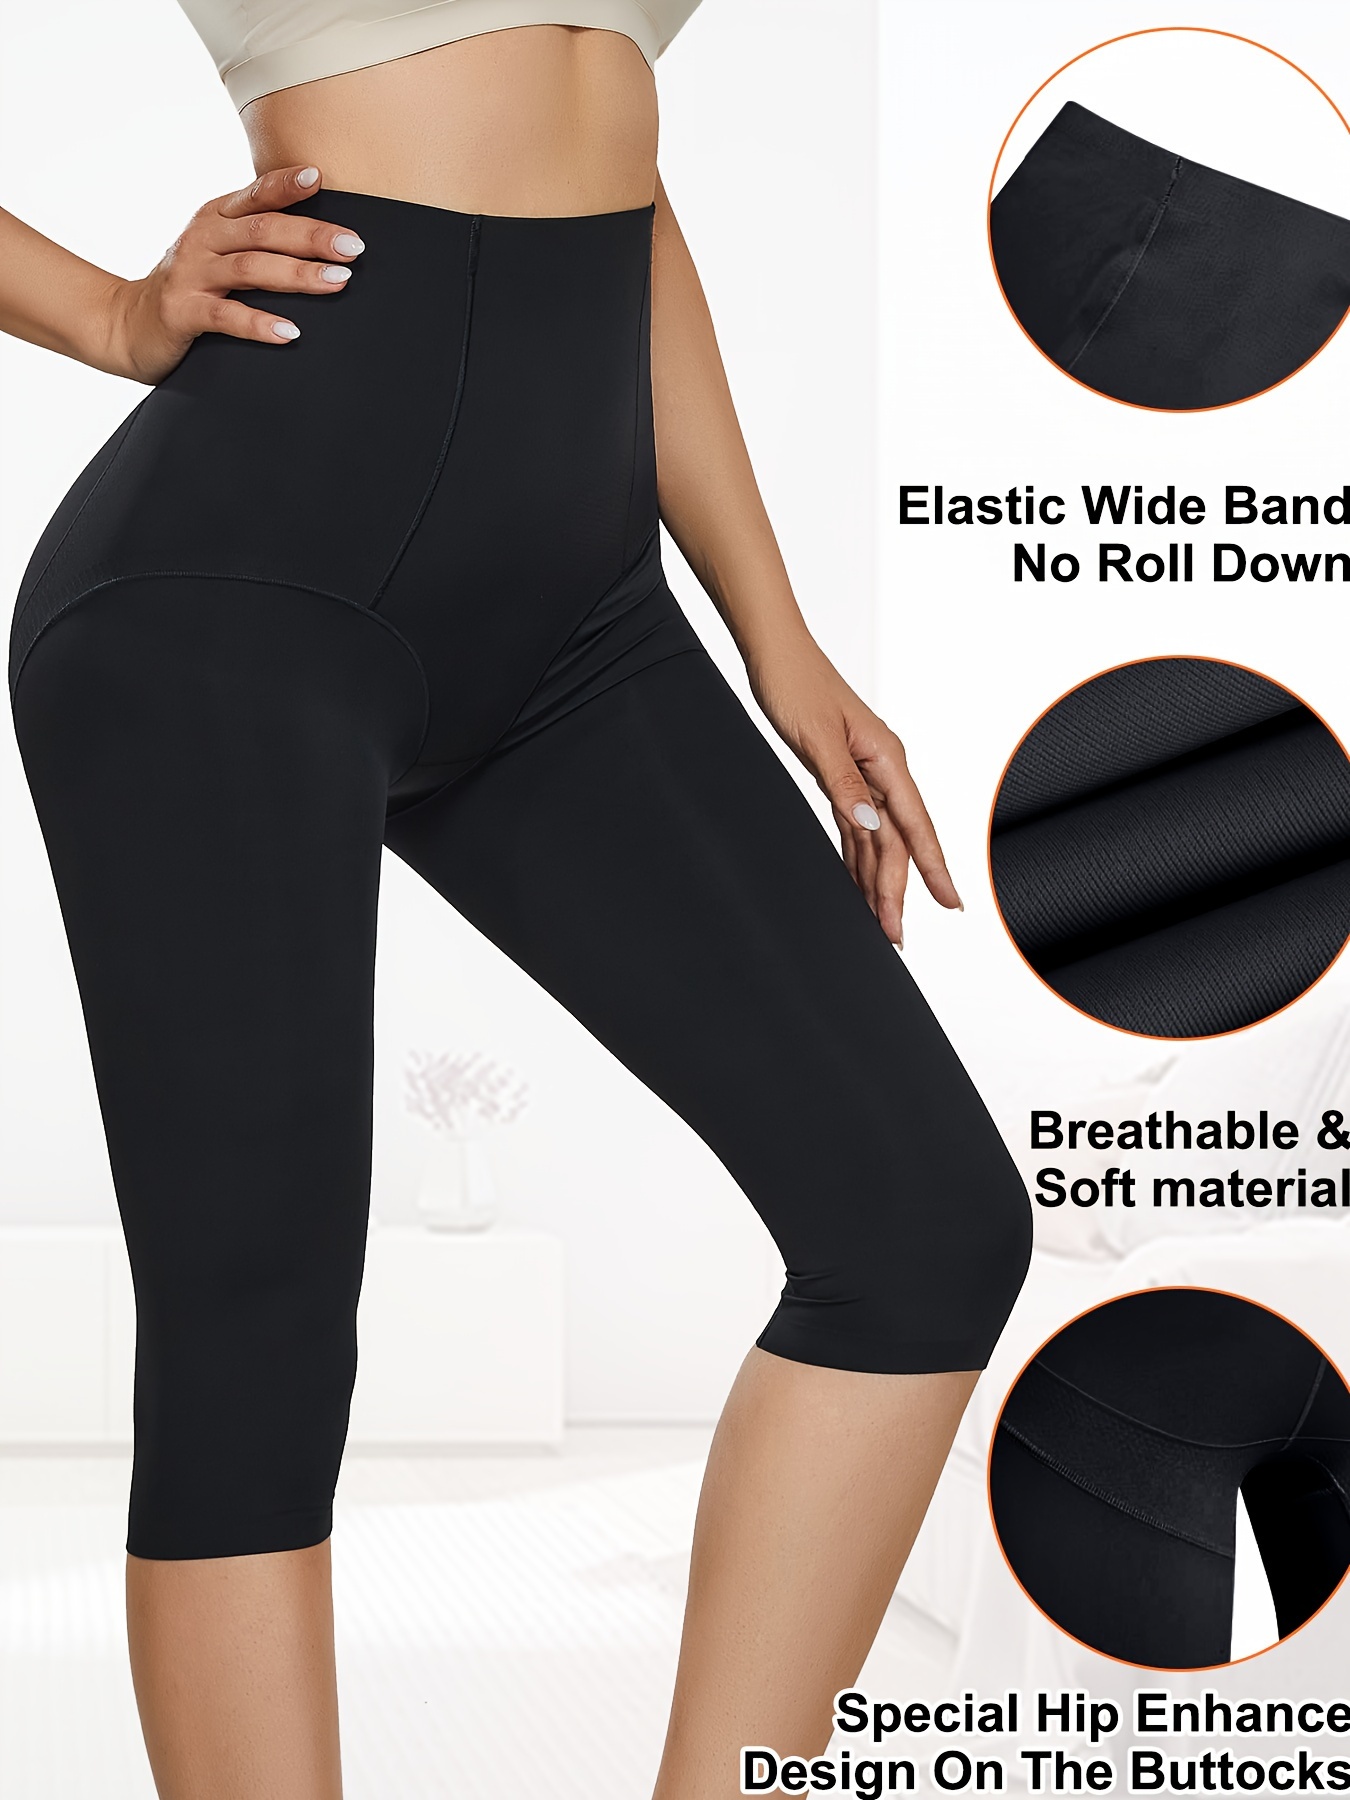 What is the difference between shaper shorts, leggings and briefs